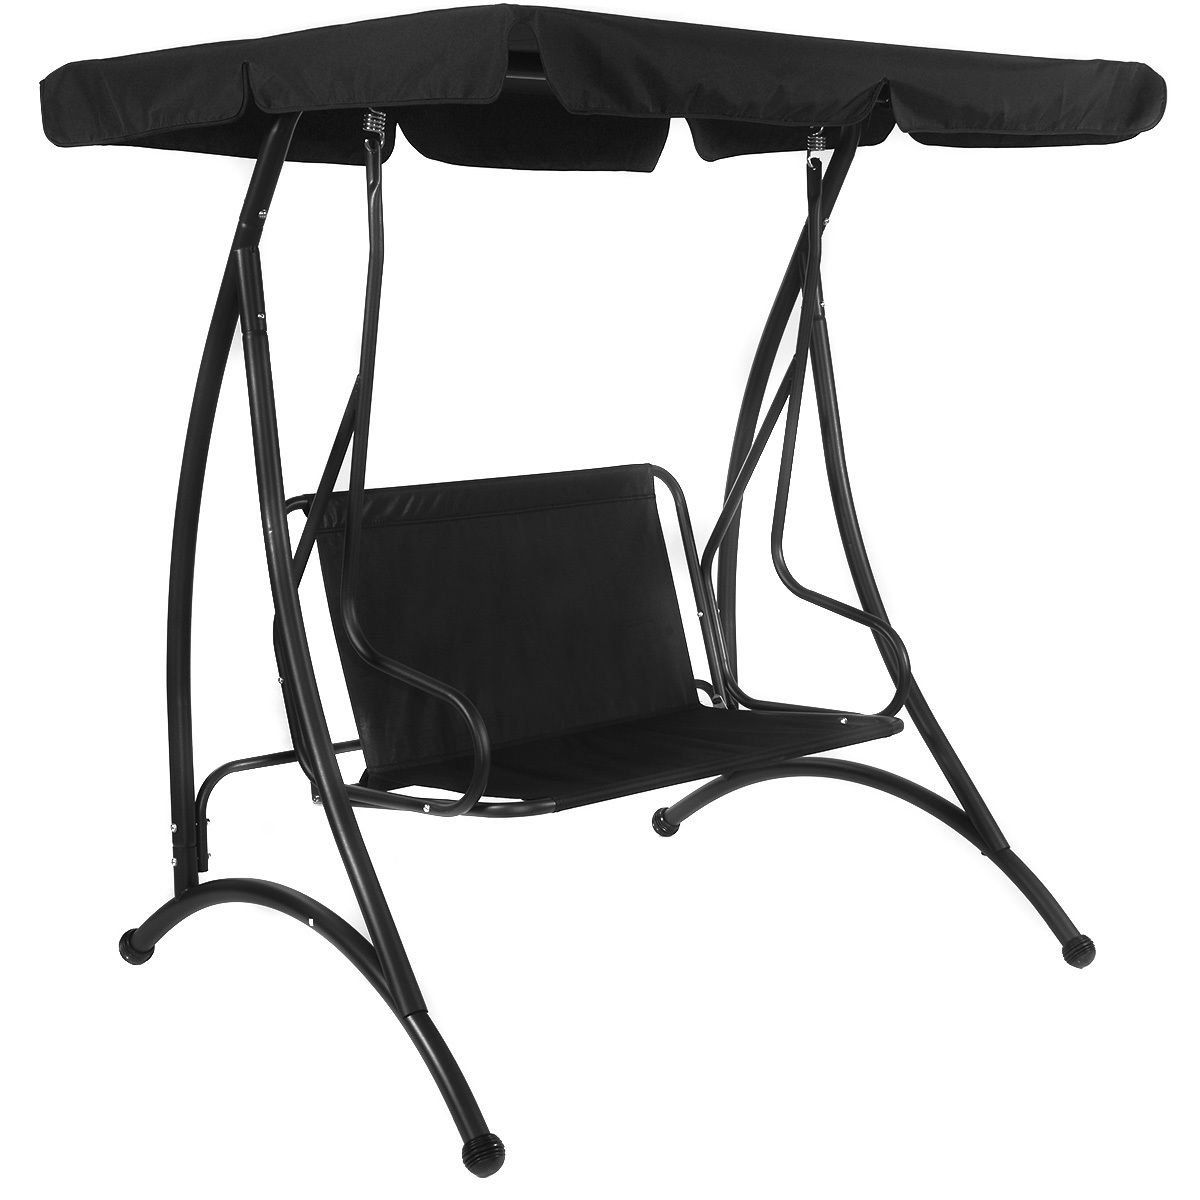 2 Person Black Steel Outdoor Swings With Regard To Recent Amazon : Black Patio Loveseat Swing Canopy Comfortable W (View 4 of 30)